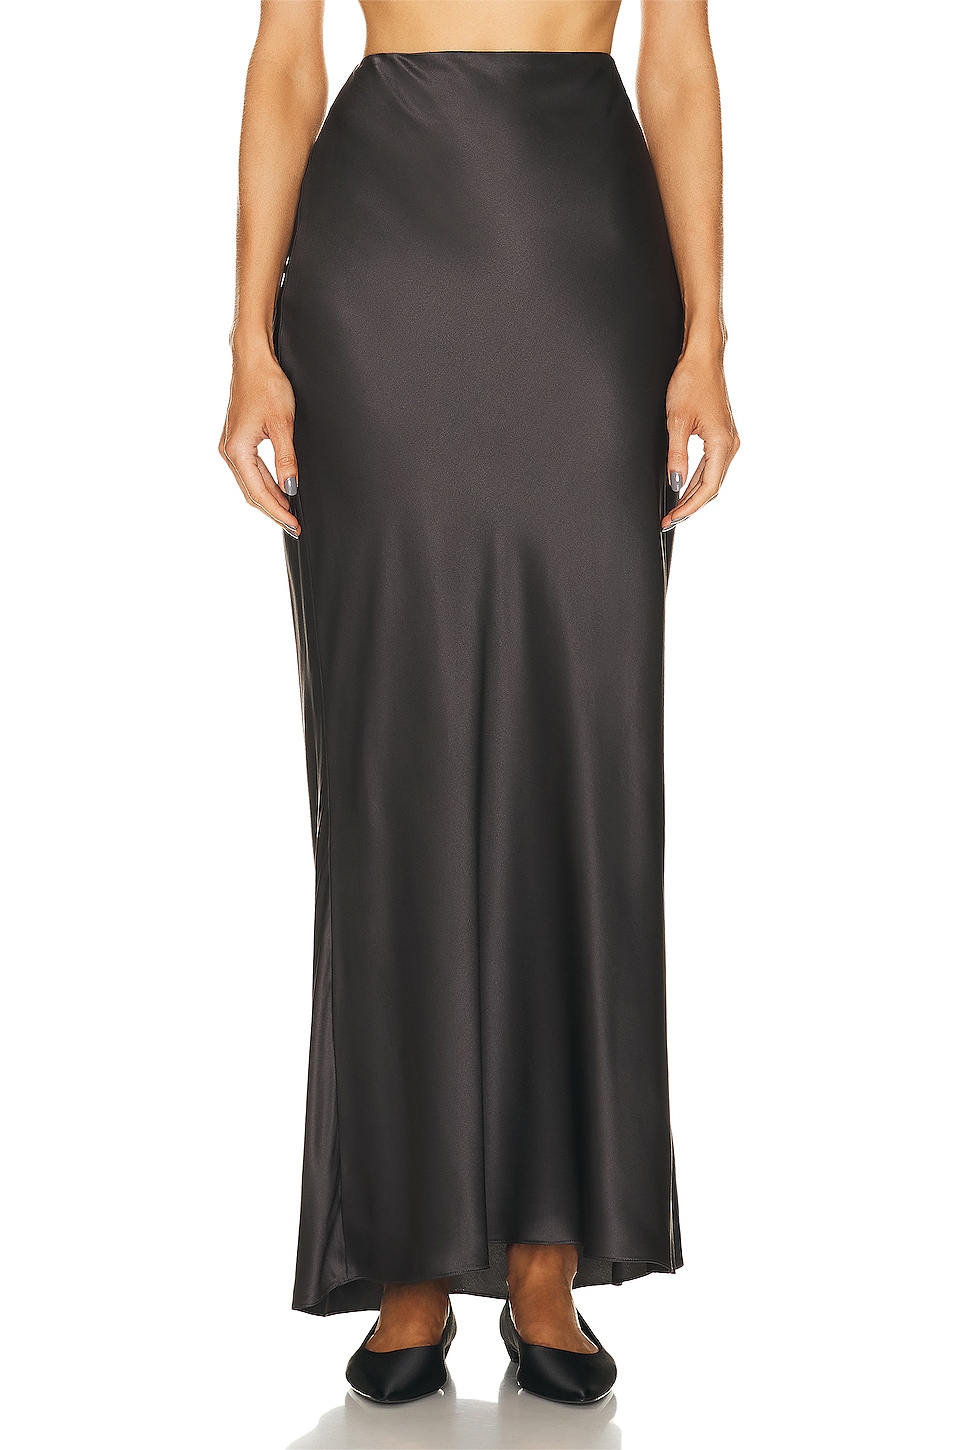 Image 1 of The Sei Bias Maxi Skirt in Carbon